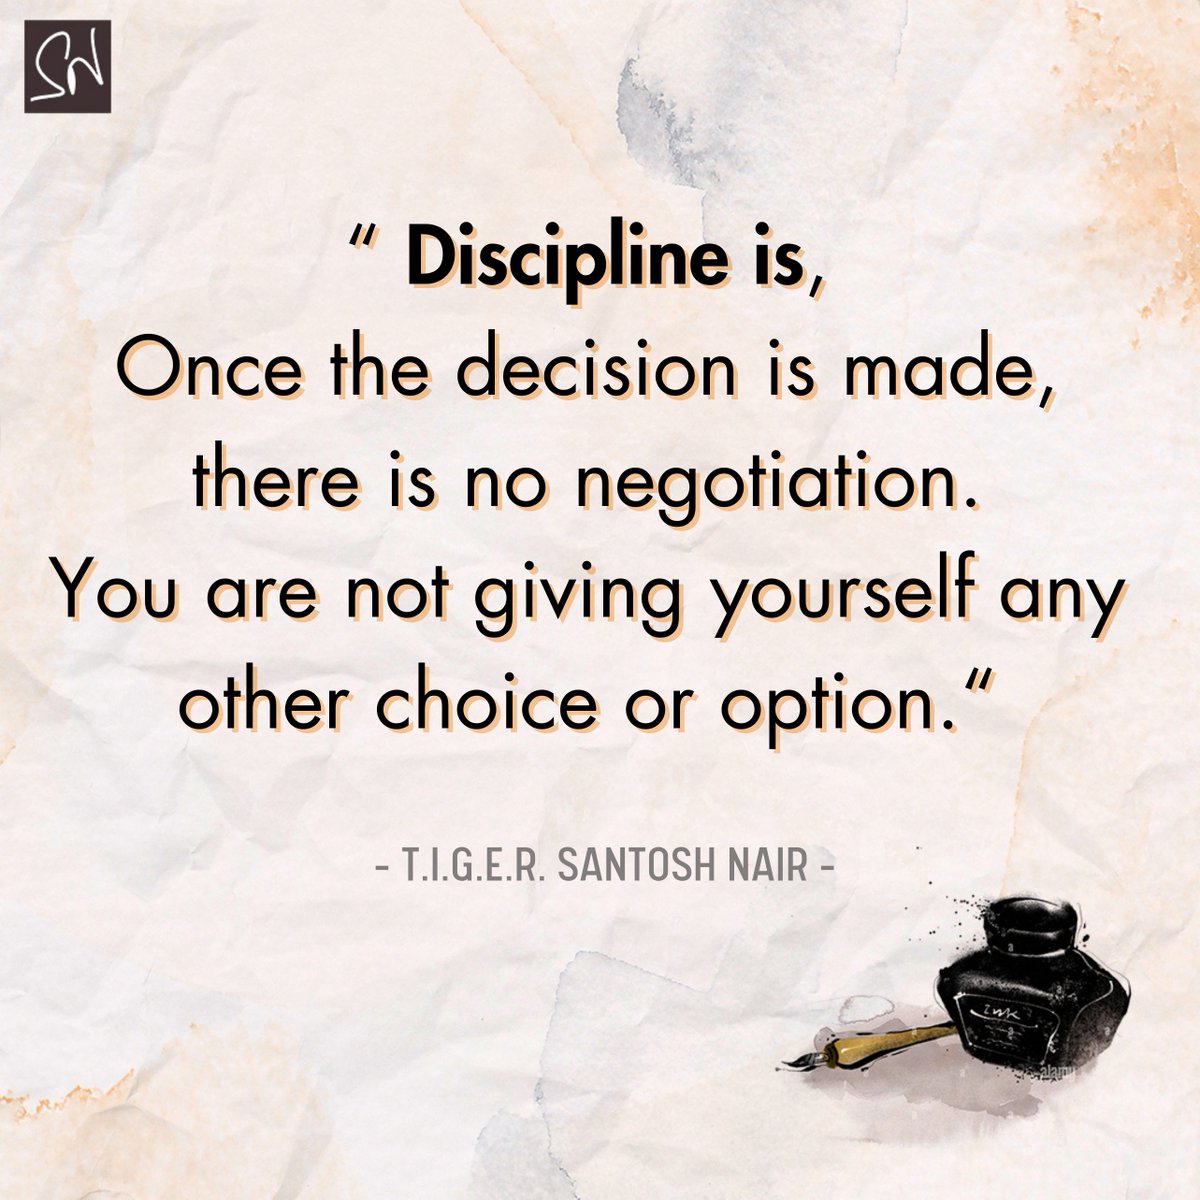 Discipline is the unwavering commitment we choose once, and live out daily. No back doors, no excuses—just pure dedication to our path. Let's hold ourselves accountable. Are you ready to make that choice? 💪 #NoNegotiation #StayDisciplined